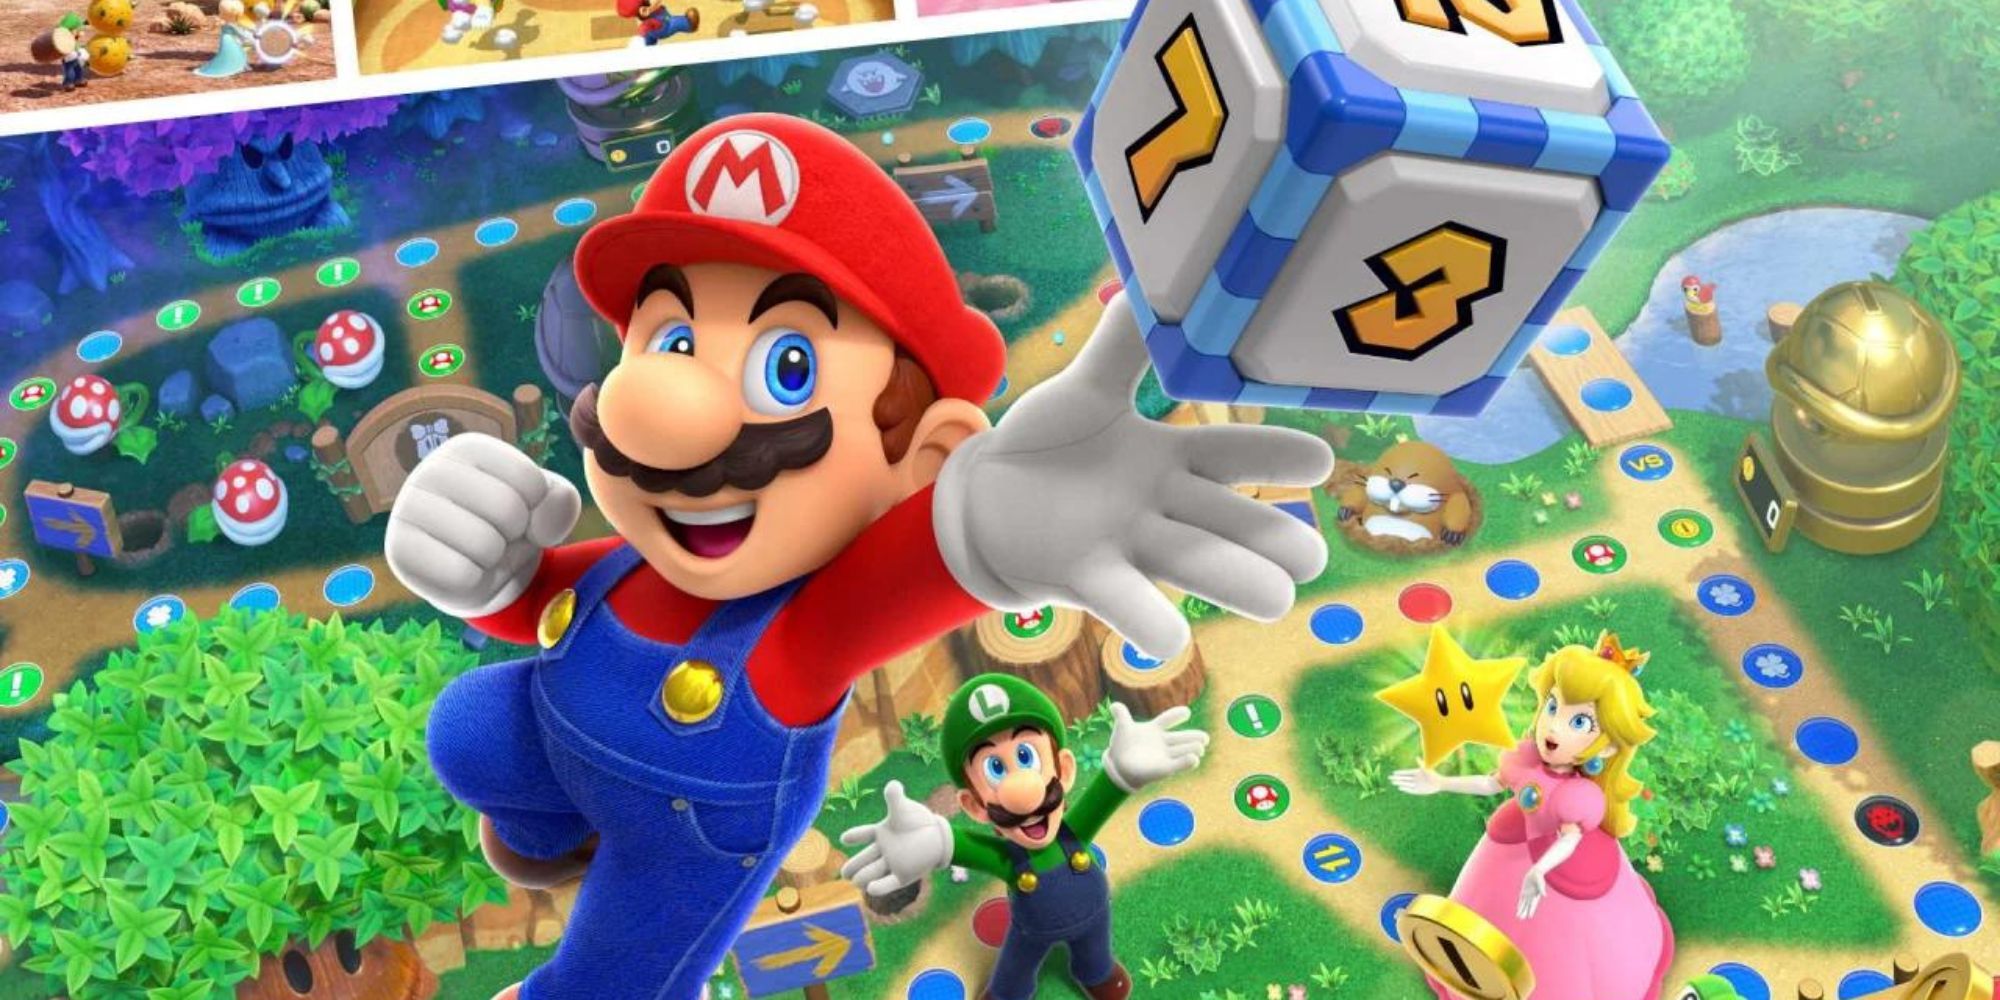 Mario prepares to roll a dice while Luigi and Princess Peach stand on the board beneath him in Super Mario Party